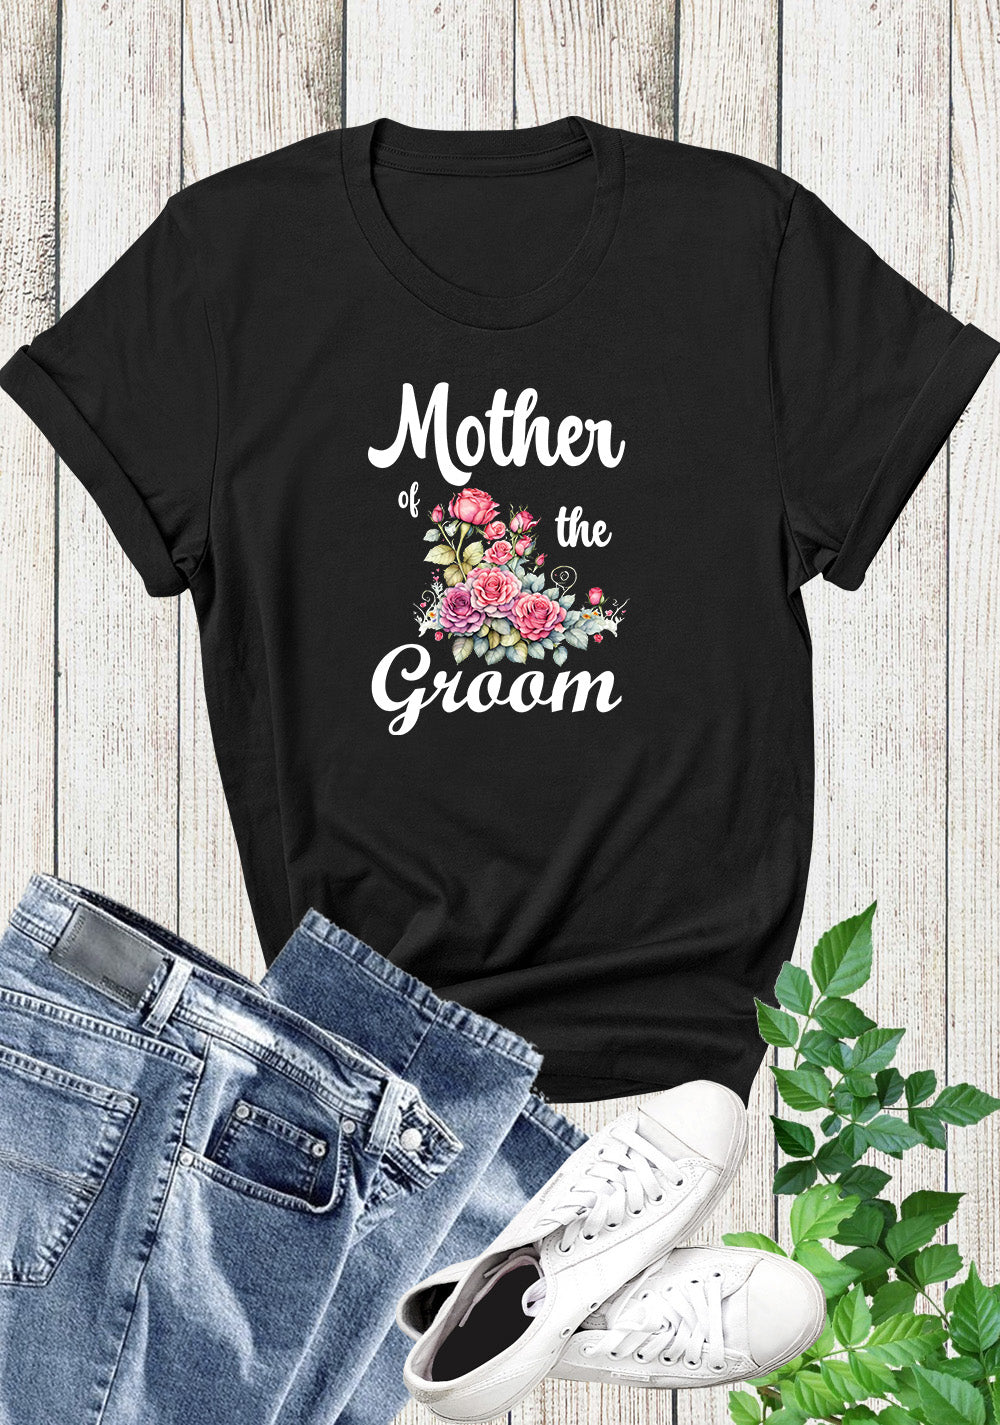 Mother of the groom shirt